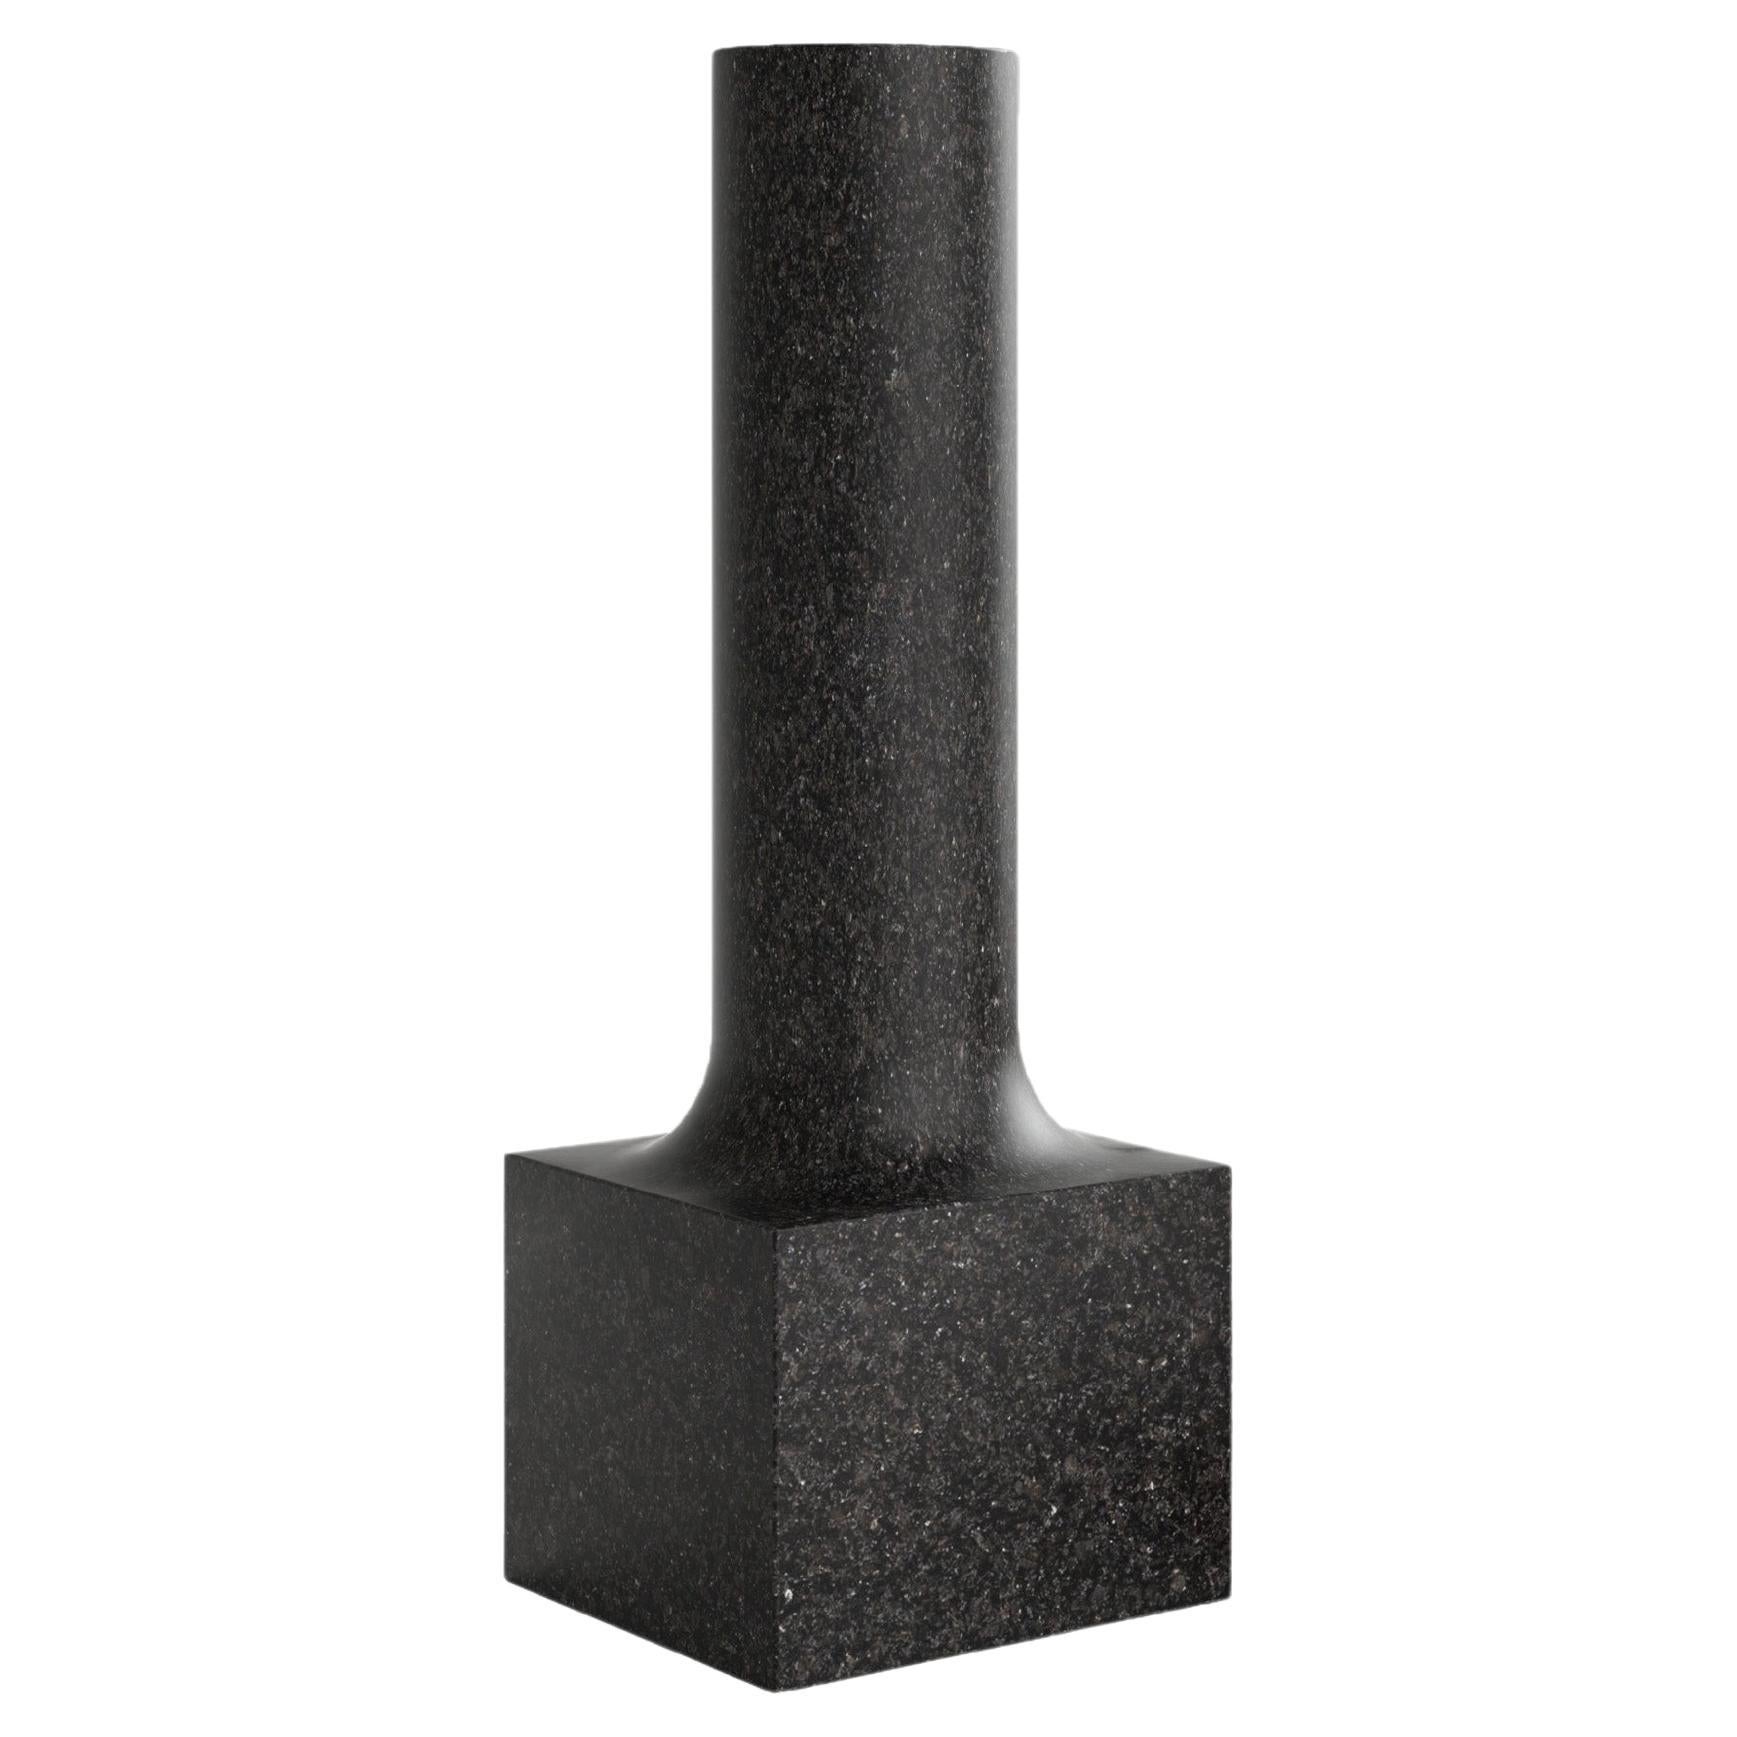 Palazzo V2 is a 21st Century sculptural vase made by Italian artisans in granite stone. It is part of the collectible design language Palazzo that has been developed by the Edizione Limitata's art research team in Milan. The small monument to the